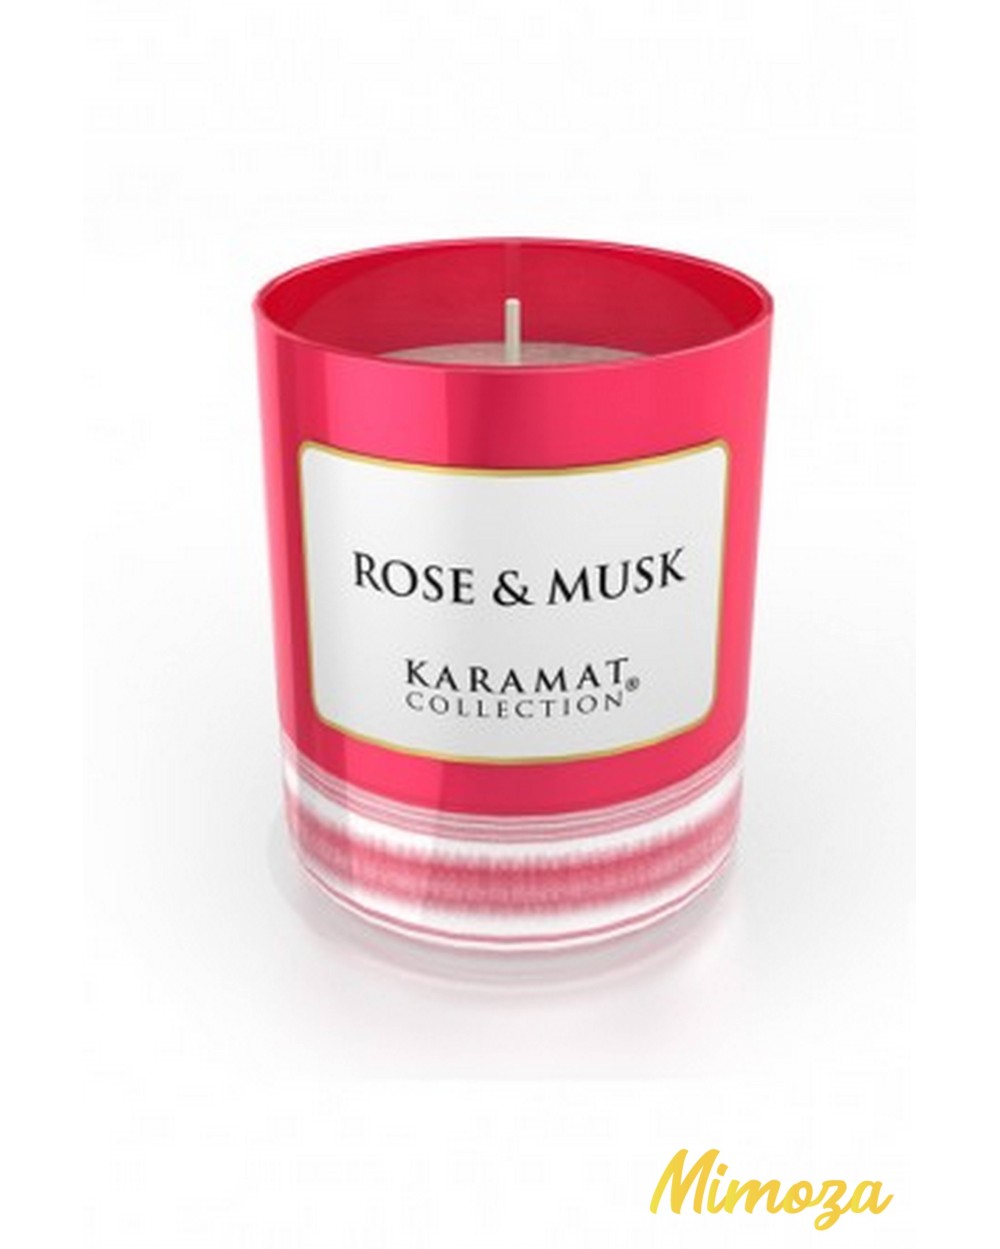 Rose and musk scented candle - Karamat Collection